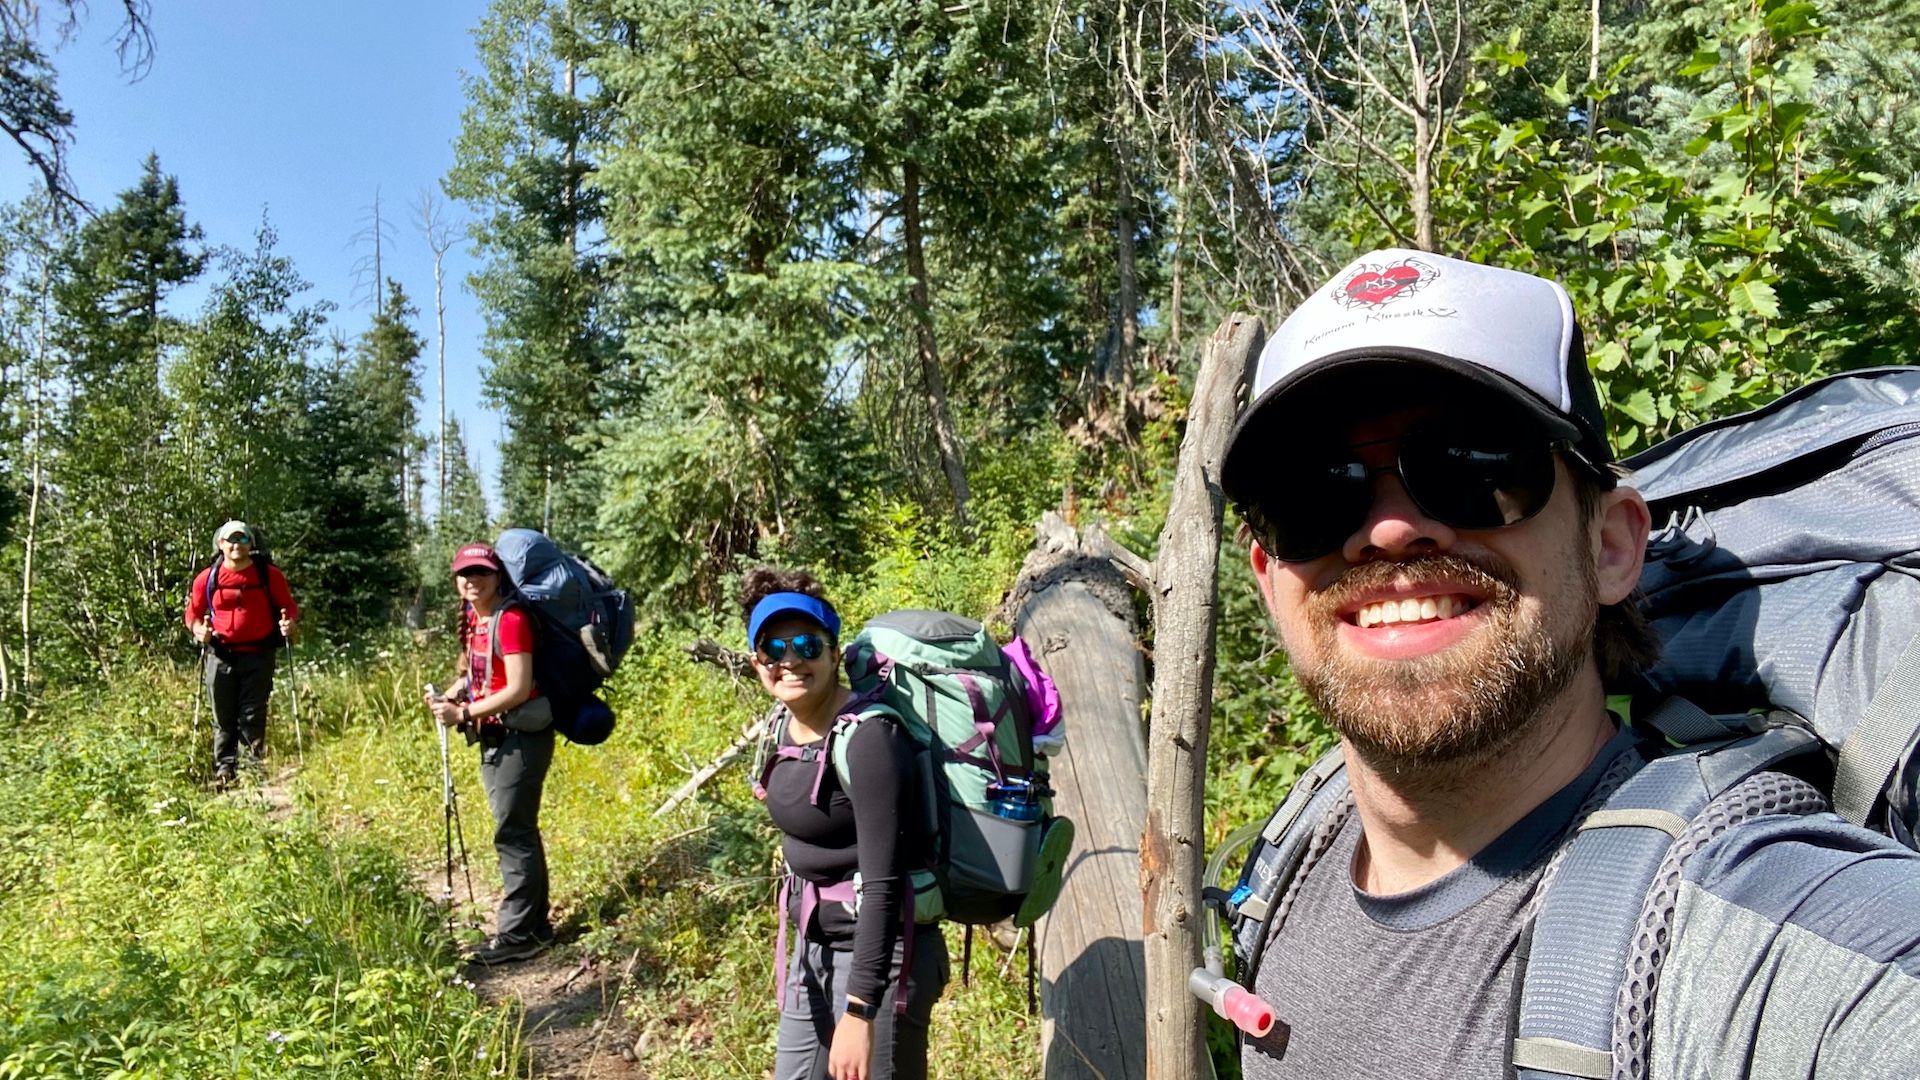 Andrew, Mindy, Meera, and Jerry spread out along the trail to start off the final day of hiking.